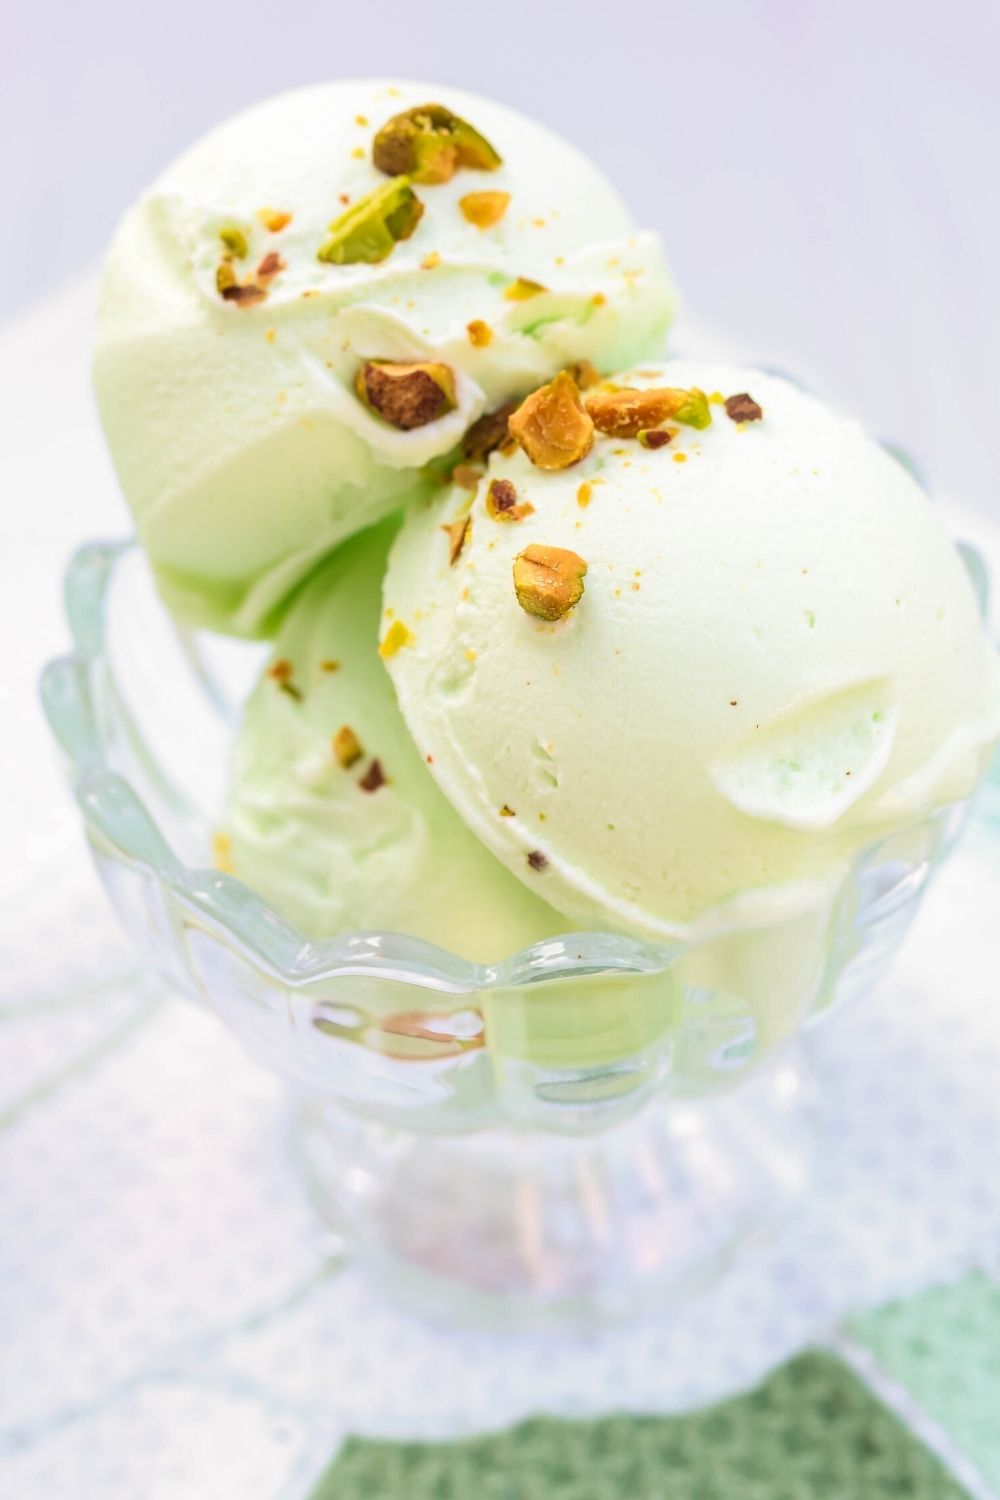 close-up view of scoops of low carb pistachio ice cream made in the Ninja Creami, served in a glass dish.